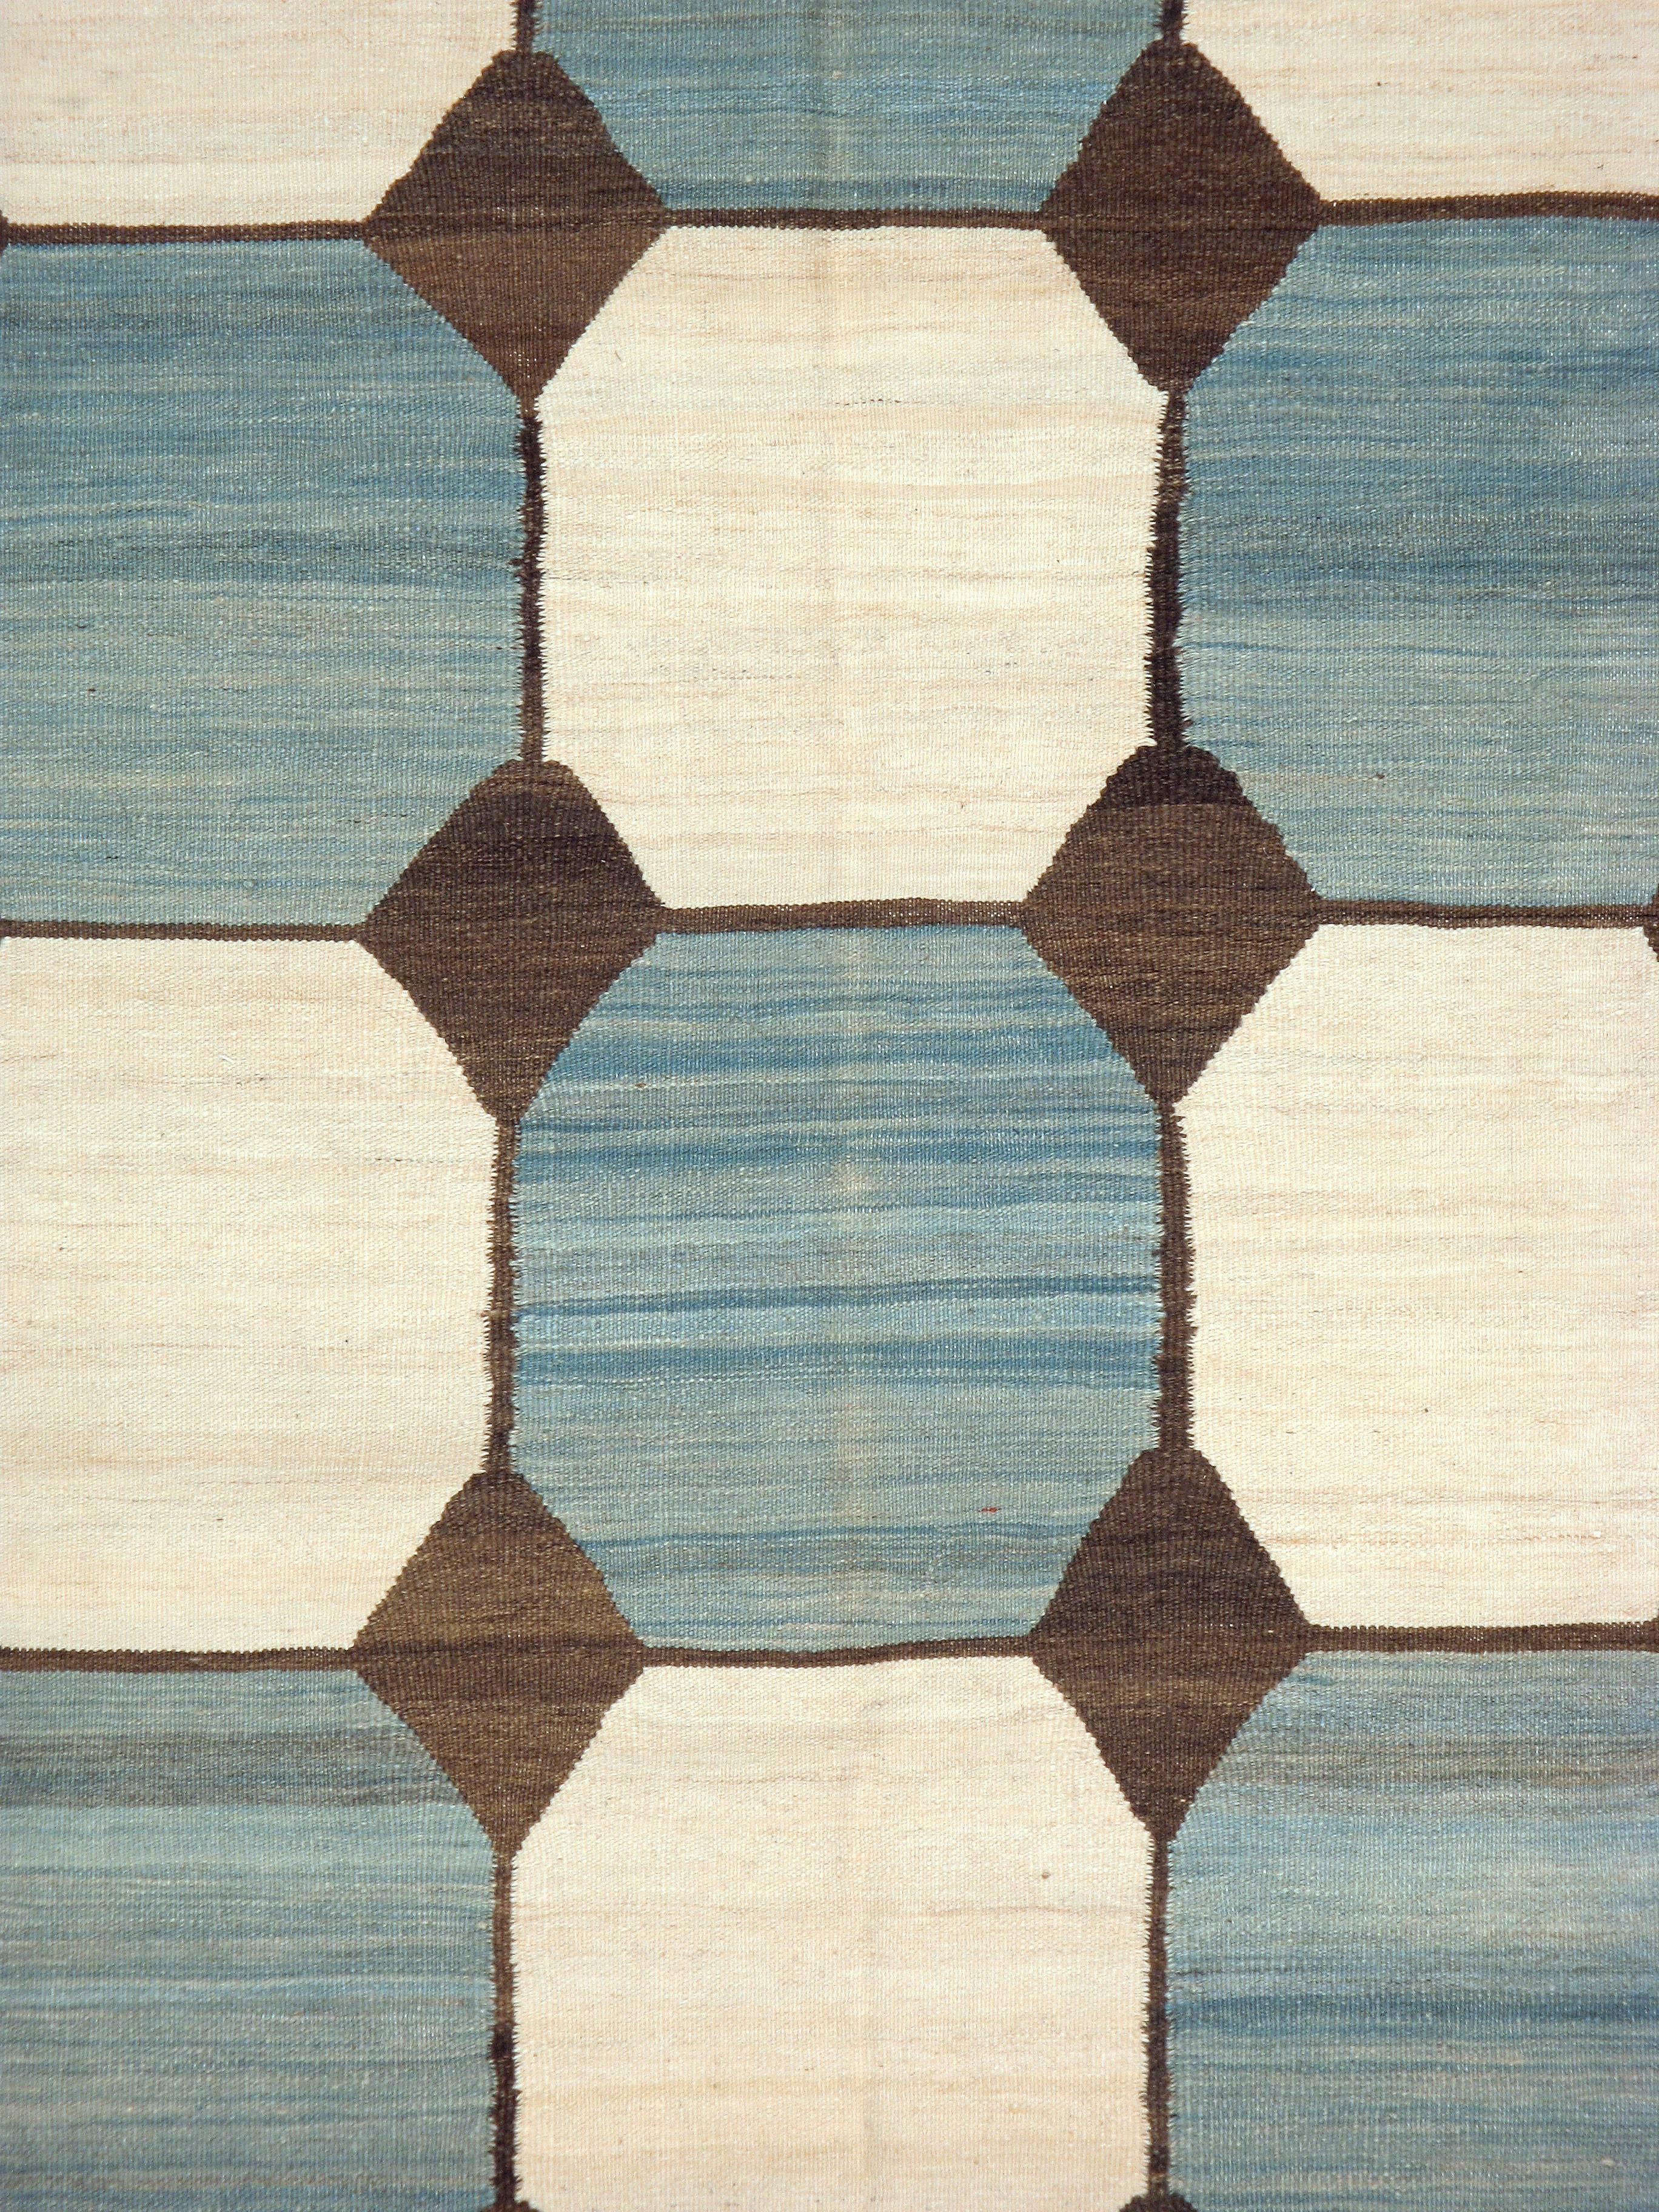 A Persian modernist flat-weave from the fourth quarter of the 20th century in the style of Indian Dhurrie rugs and a weave found on Swedish and Scandinavian modern Kilims.

Measures: 10' 0